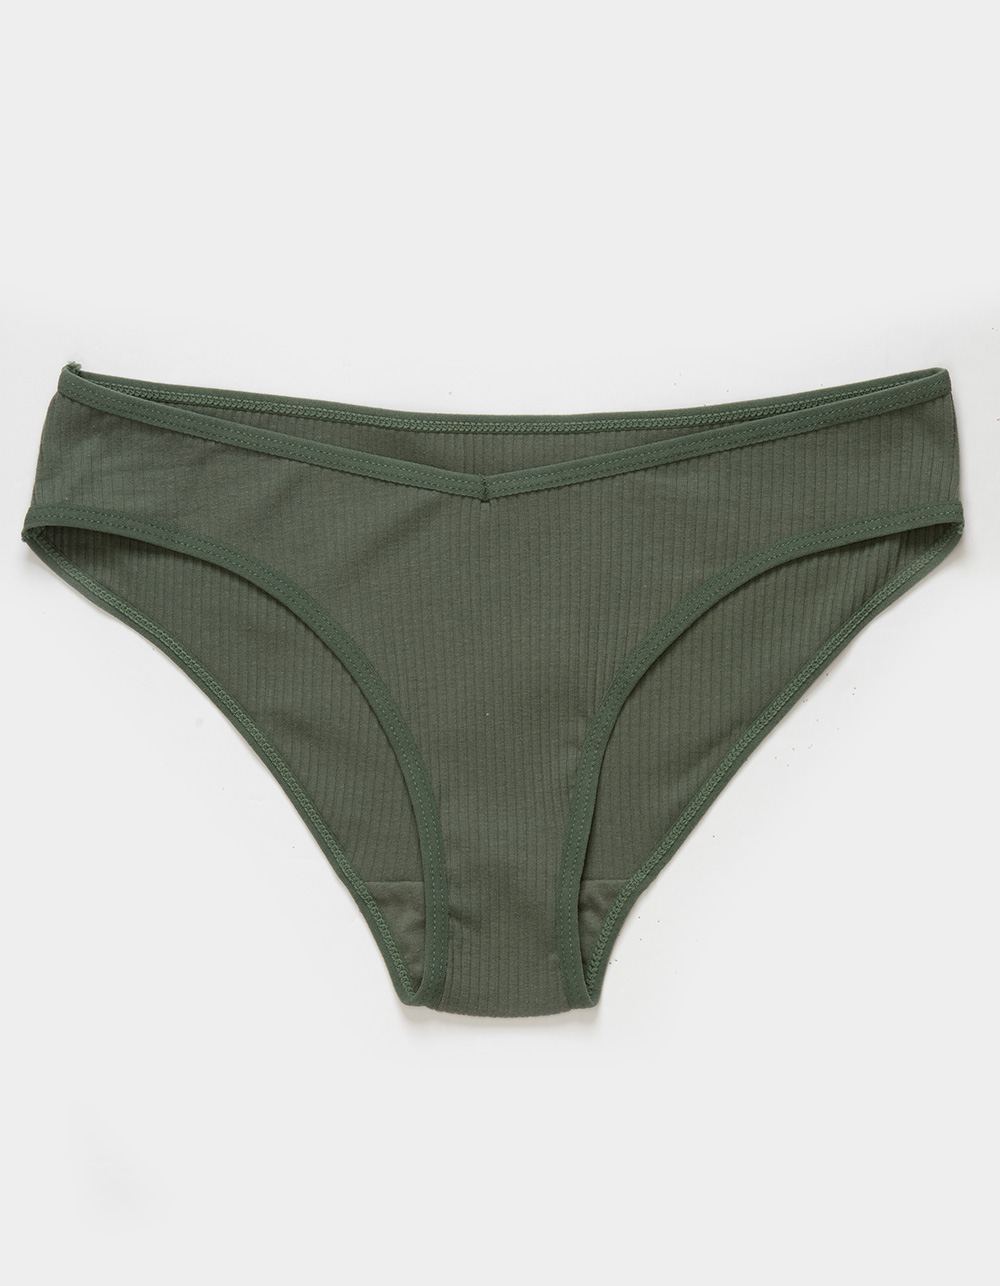 Buy Sage Green Lace Detail High Leg Knickers 6, Knickers